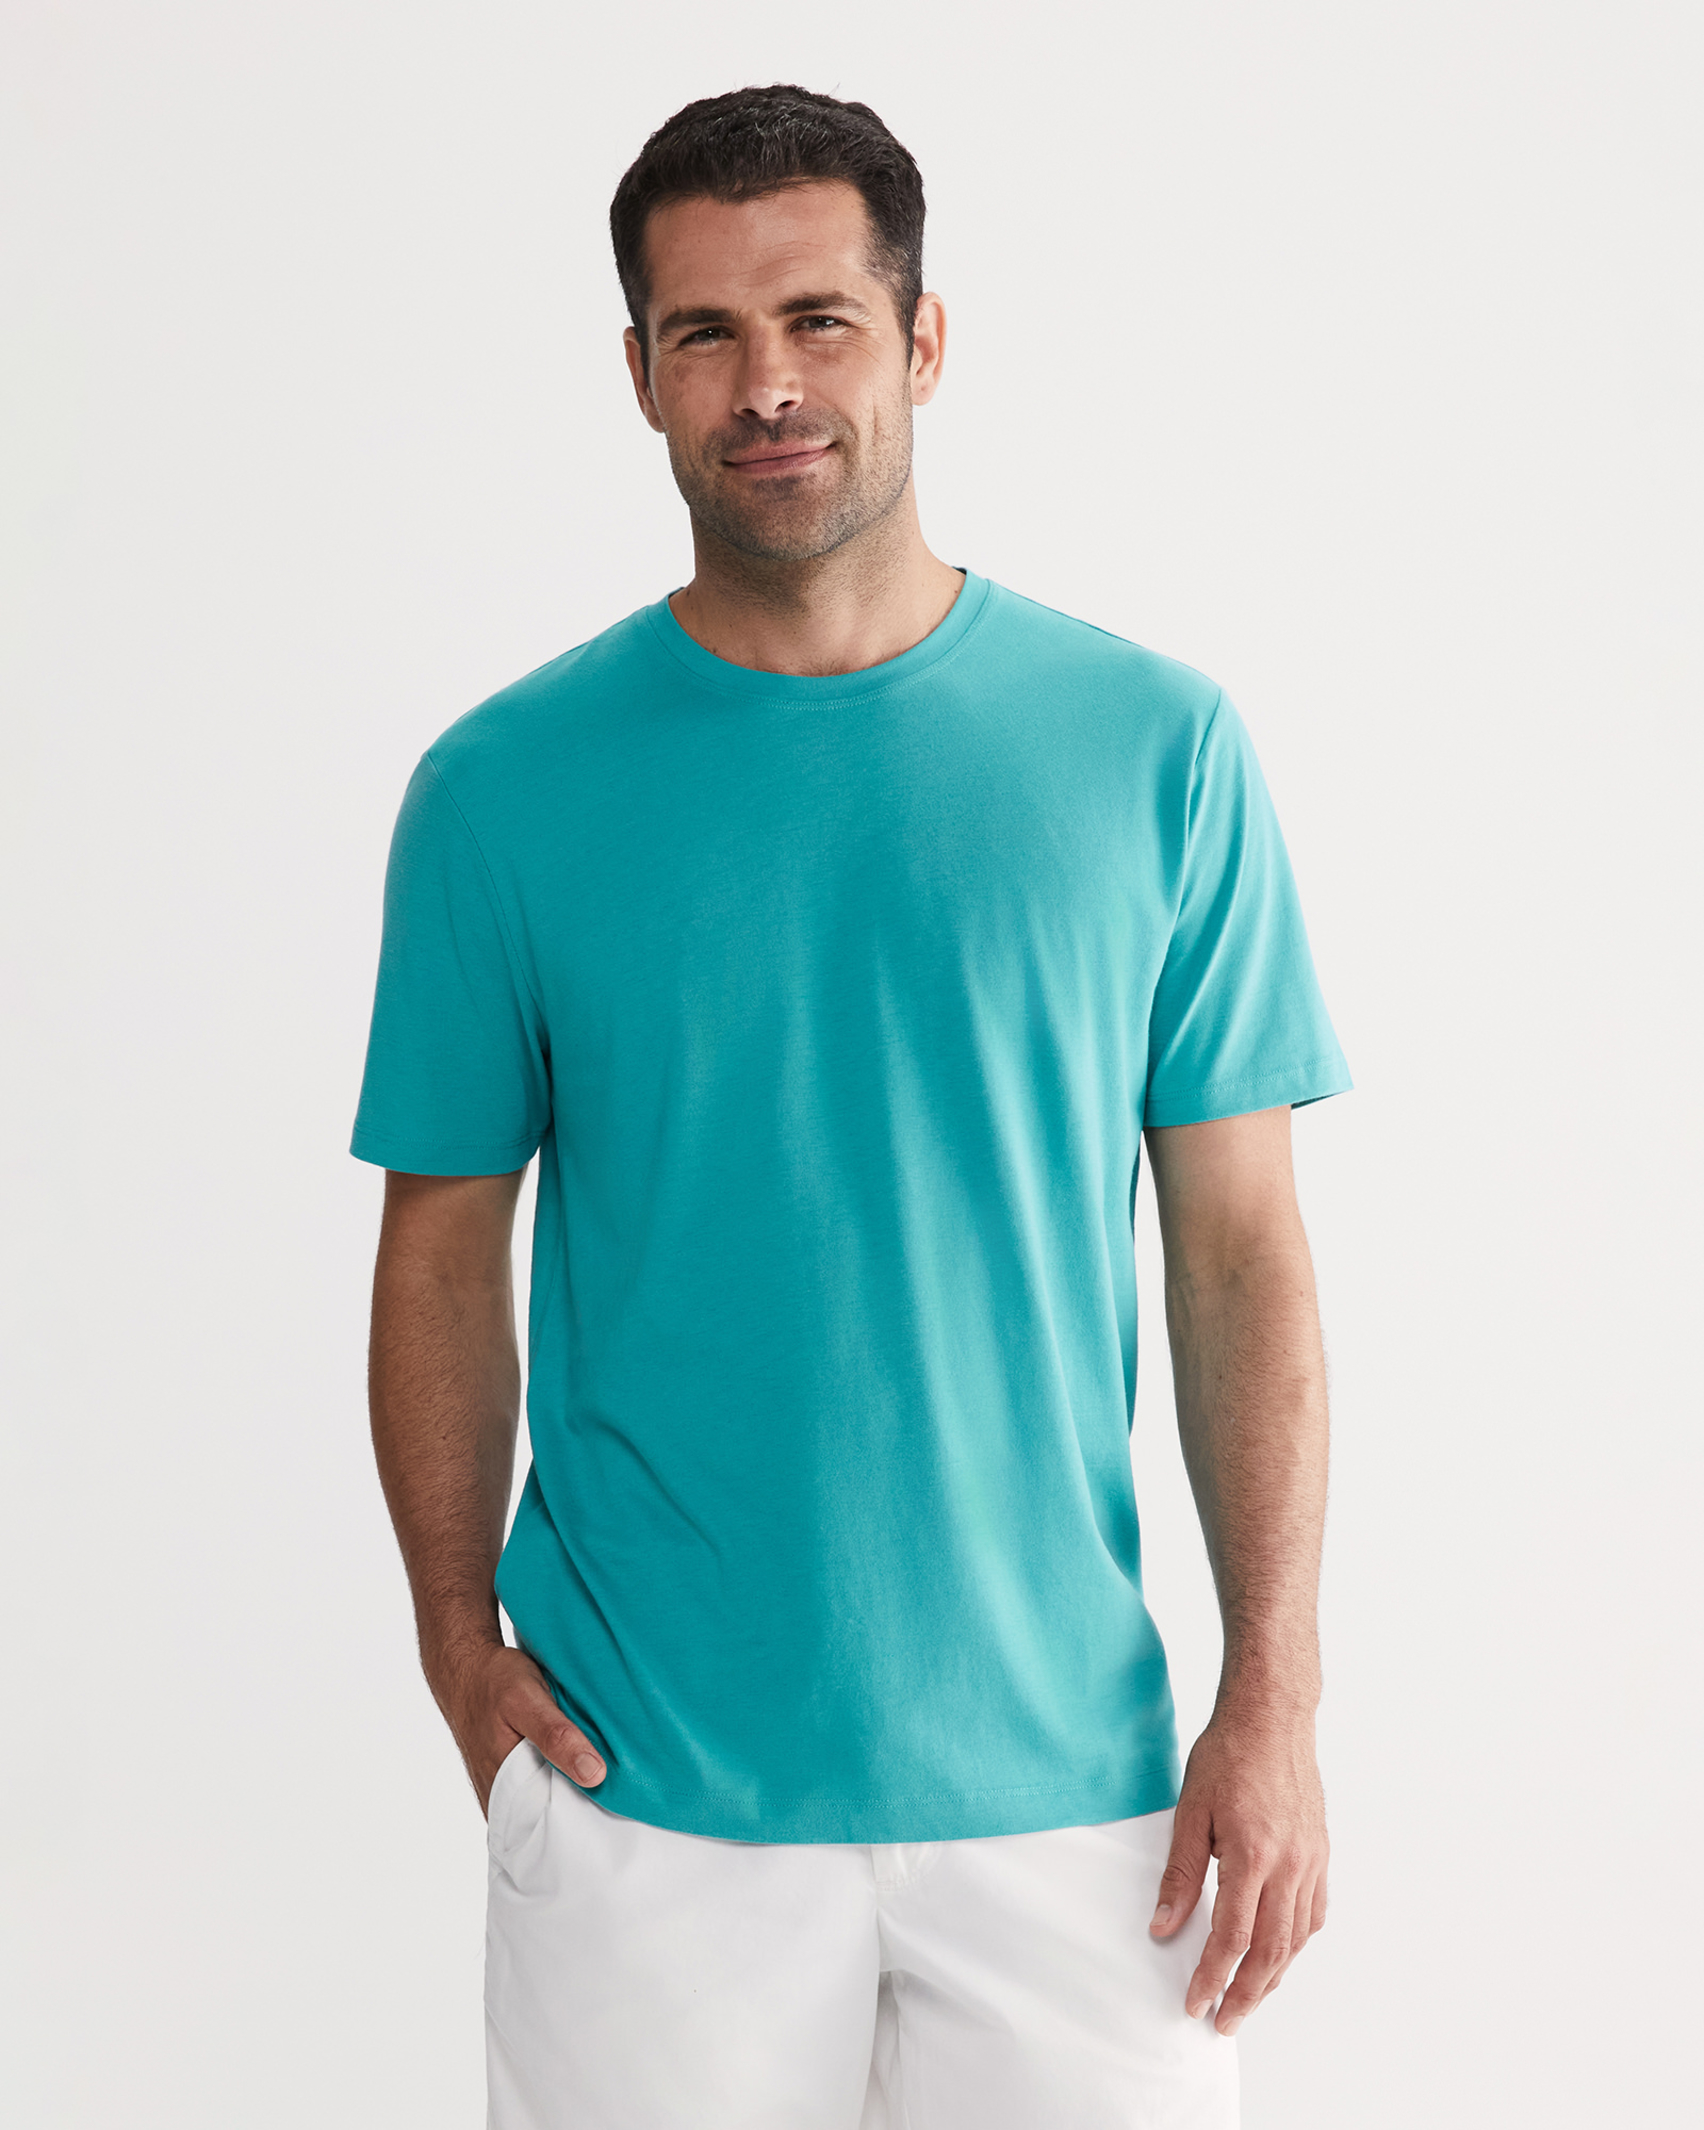 Supersoft Tee in TEAL